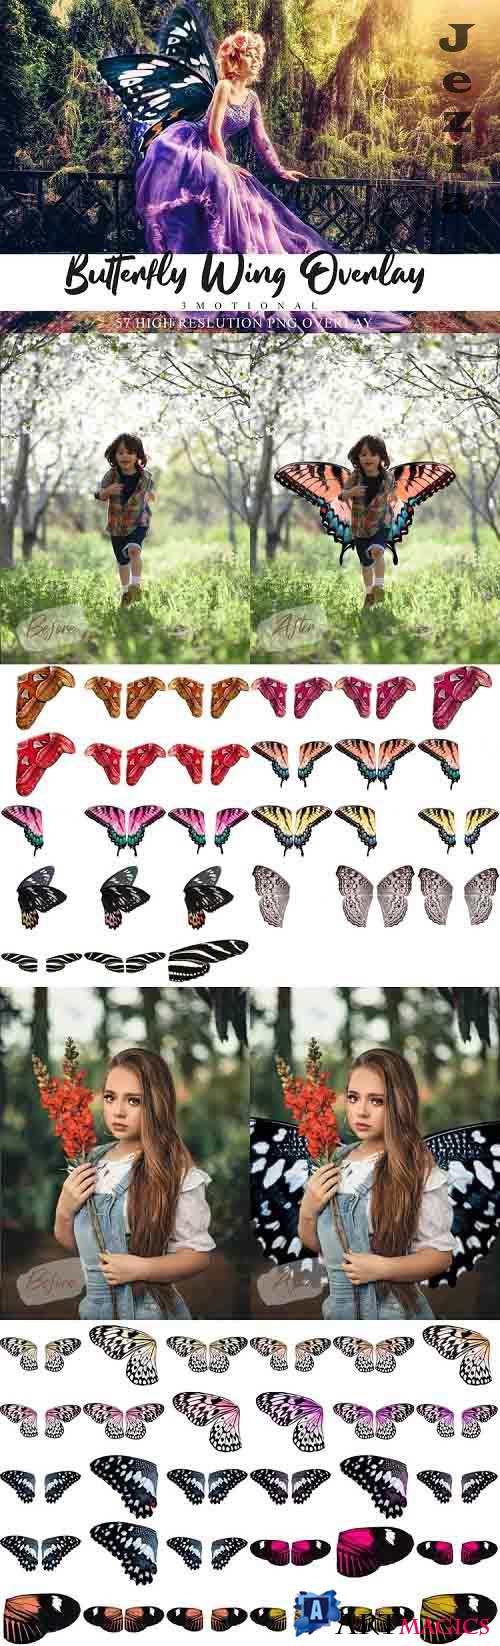 57 Colorful Butterfly Wing Overlays - 572911